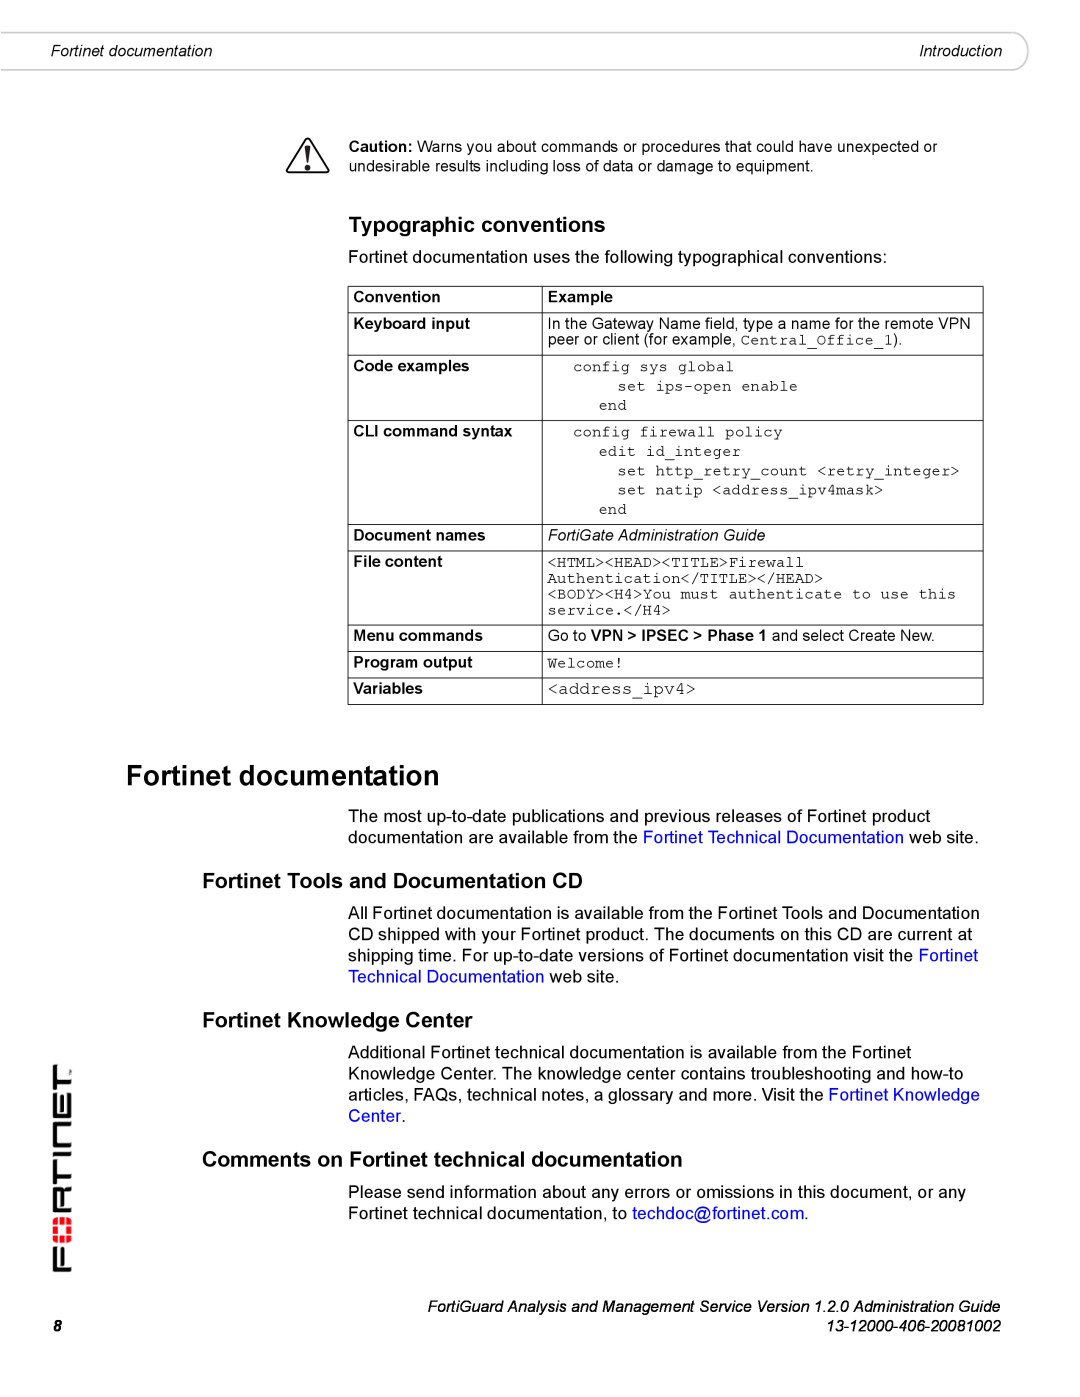 Fortinet 1.2.0 manual Fortinet documentation, Typographic conventions, Fortinet Tools and Documentation CD 